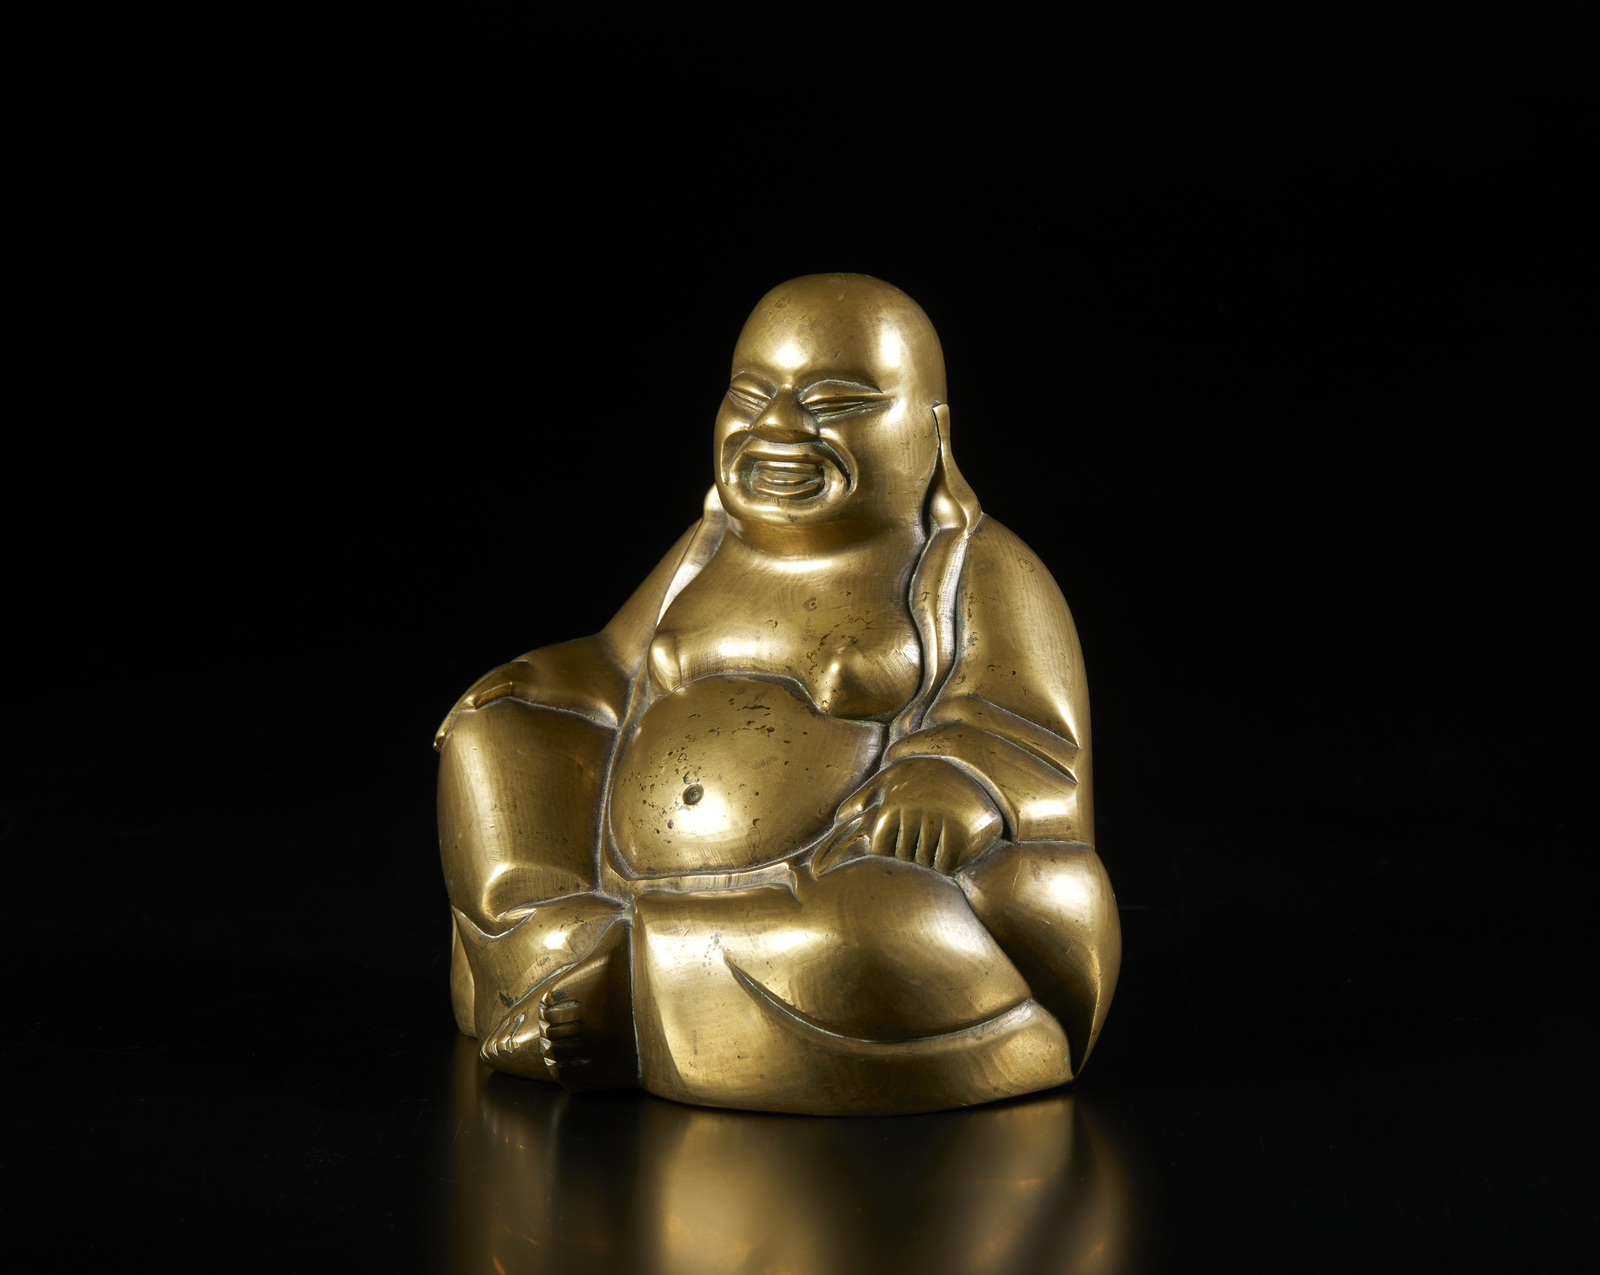 Arte Giapponese A bronze figure depicting Hotei, "the Smiling Buddha" also known as BudaiJapan, Ta